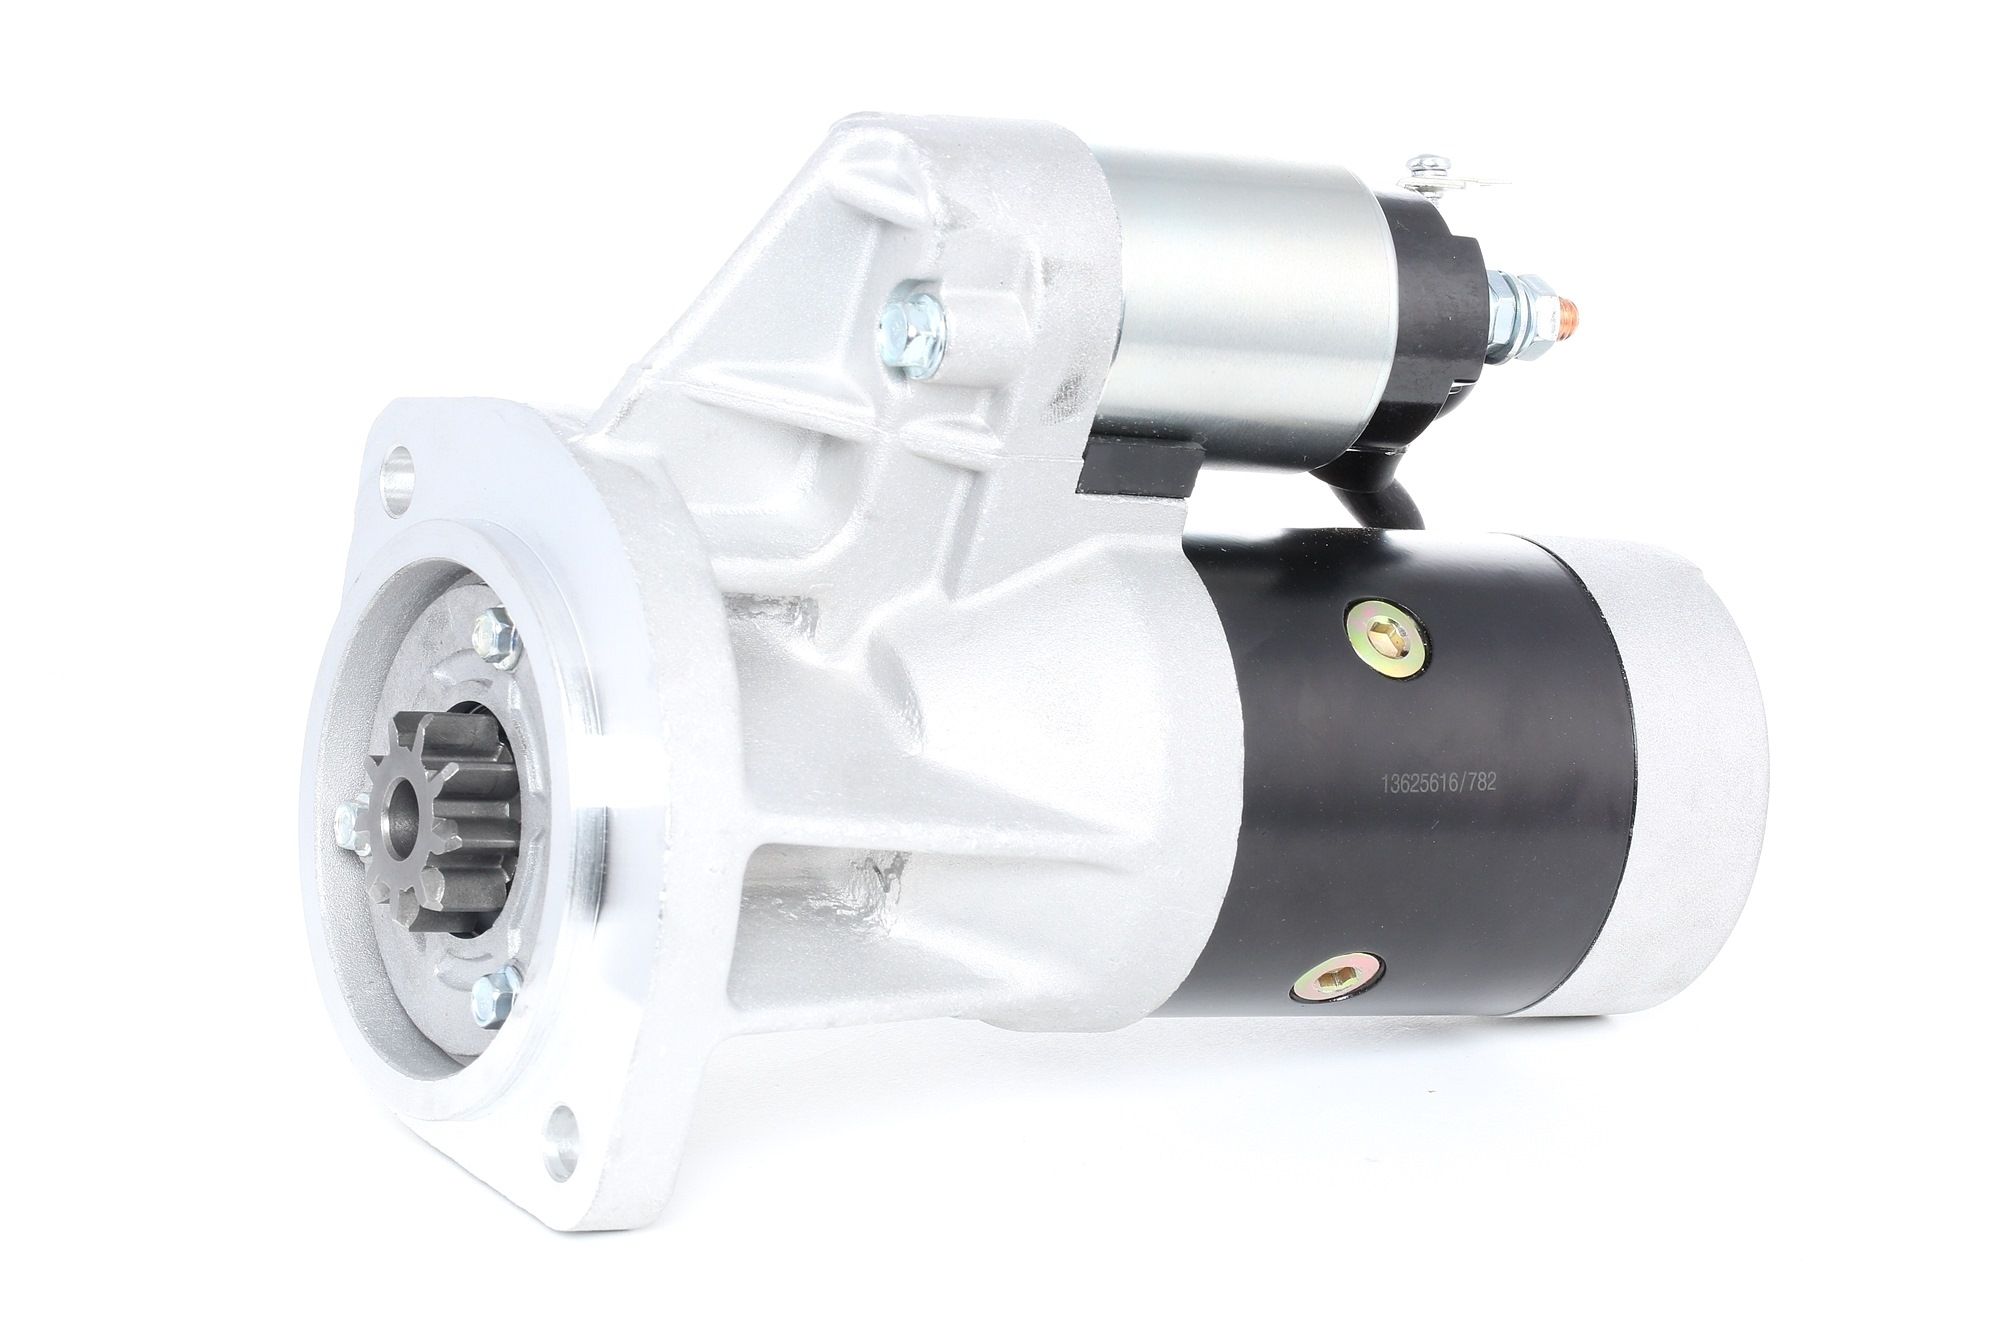 RIDEX Démarreur FORD,NISSAN,JEEP 2S0055 2506902,2506927,S114357 Starter S13106,S13106A,S13106B,S13106E,S13107,S13107A,S13109,S13127,S13127A,S13127C